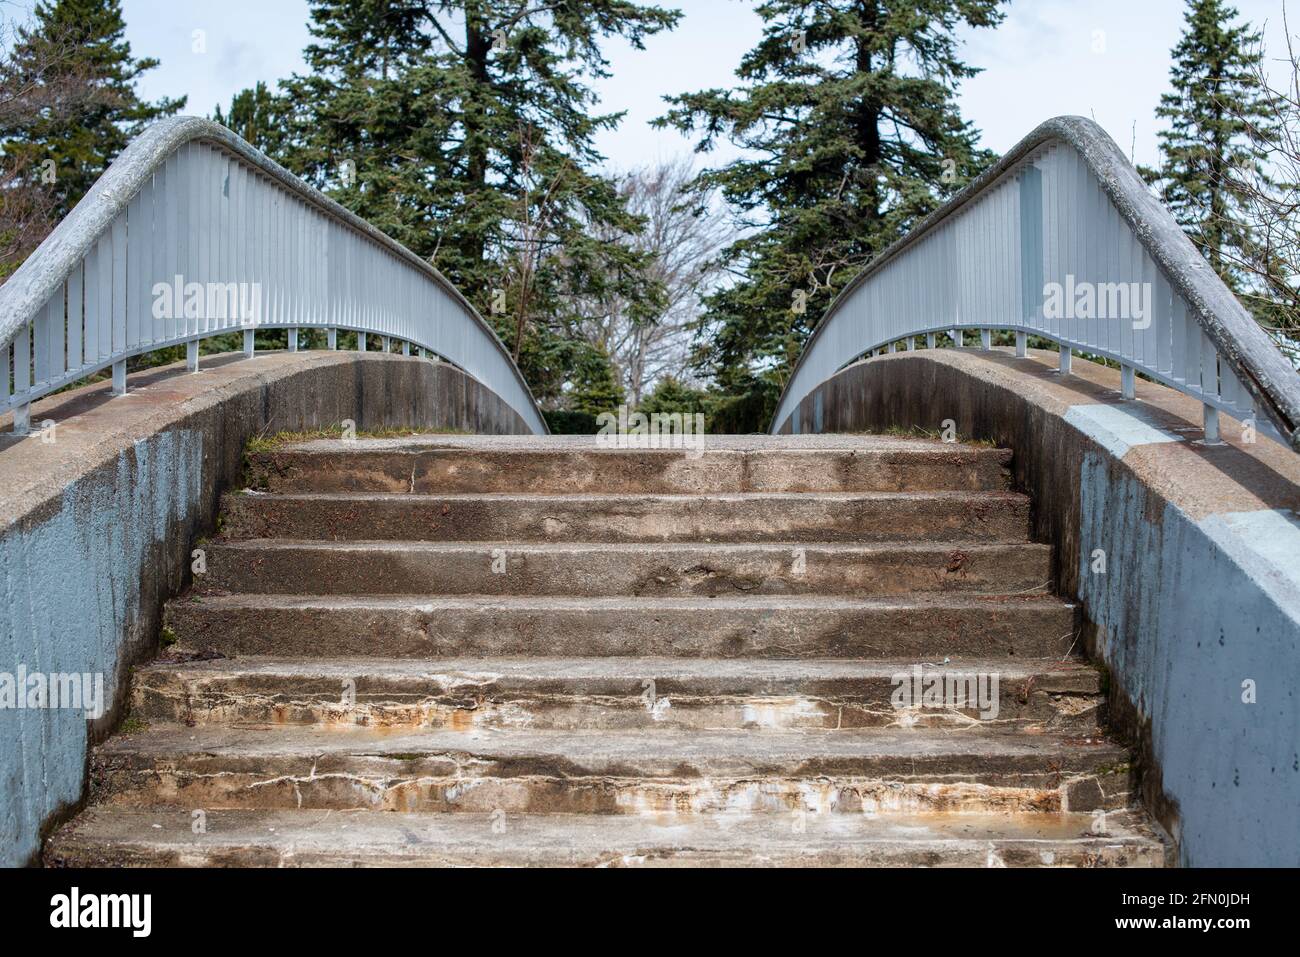 The narrow stairway to an old cantilever style footbridge. The cement bridge is worn and textured. Stock Photo